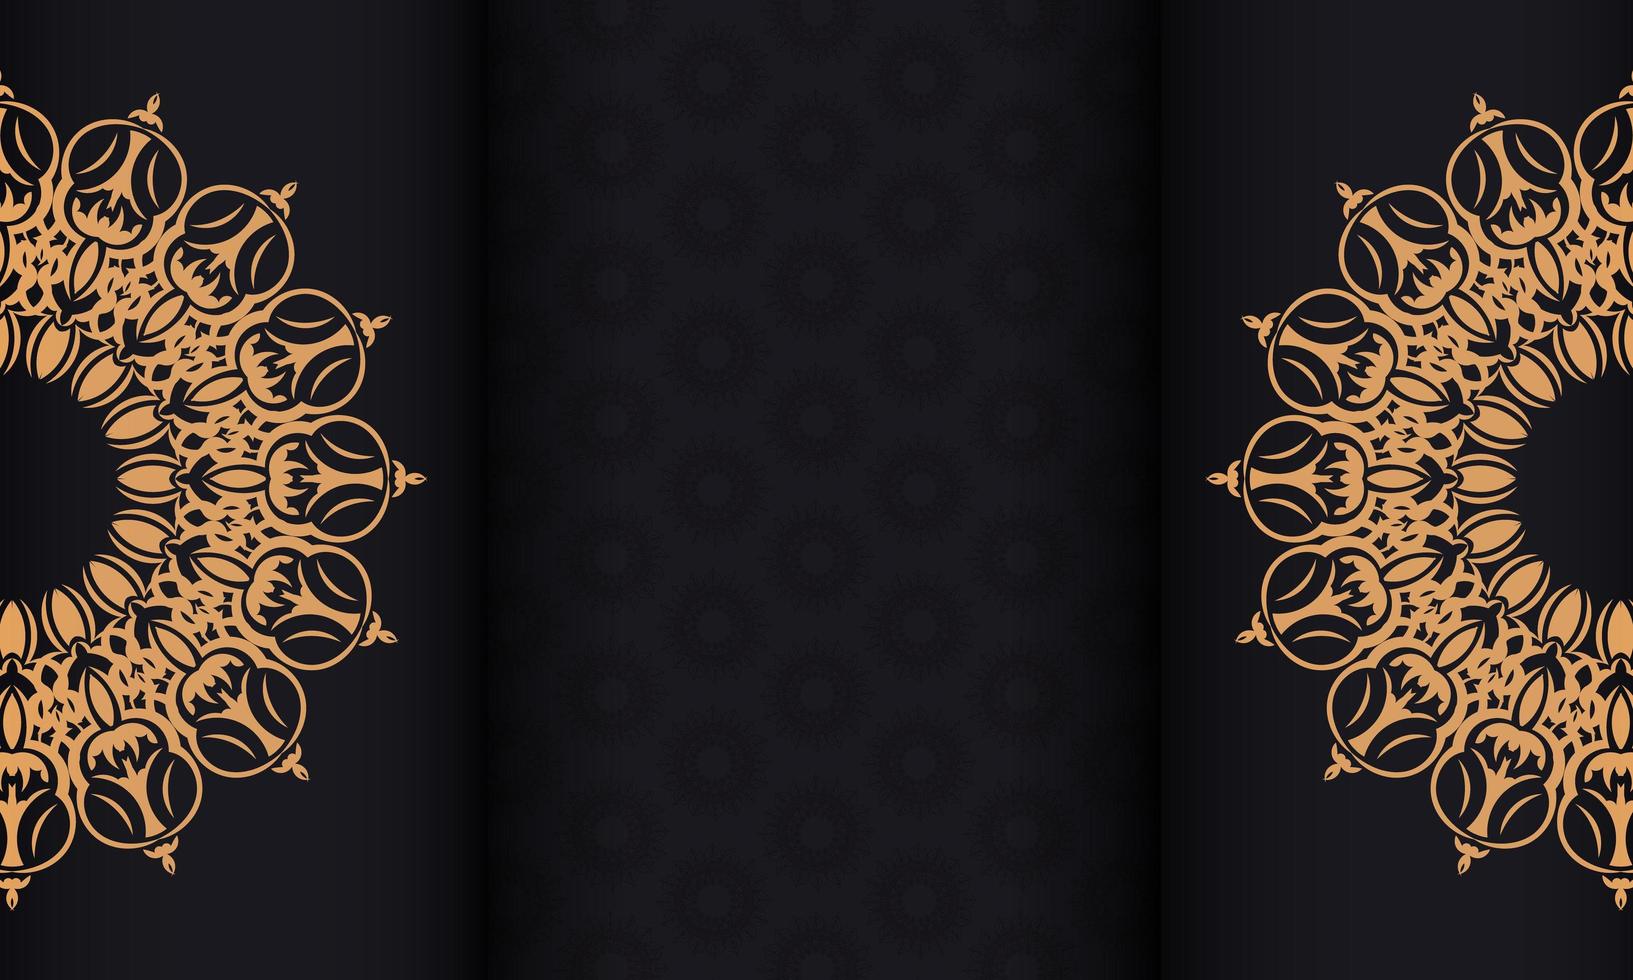 Black banner with luxurious ornaments and place under the text. Print-ready invitation design with vintage patterns. vector